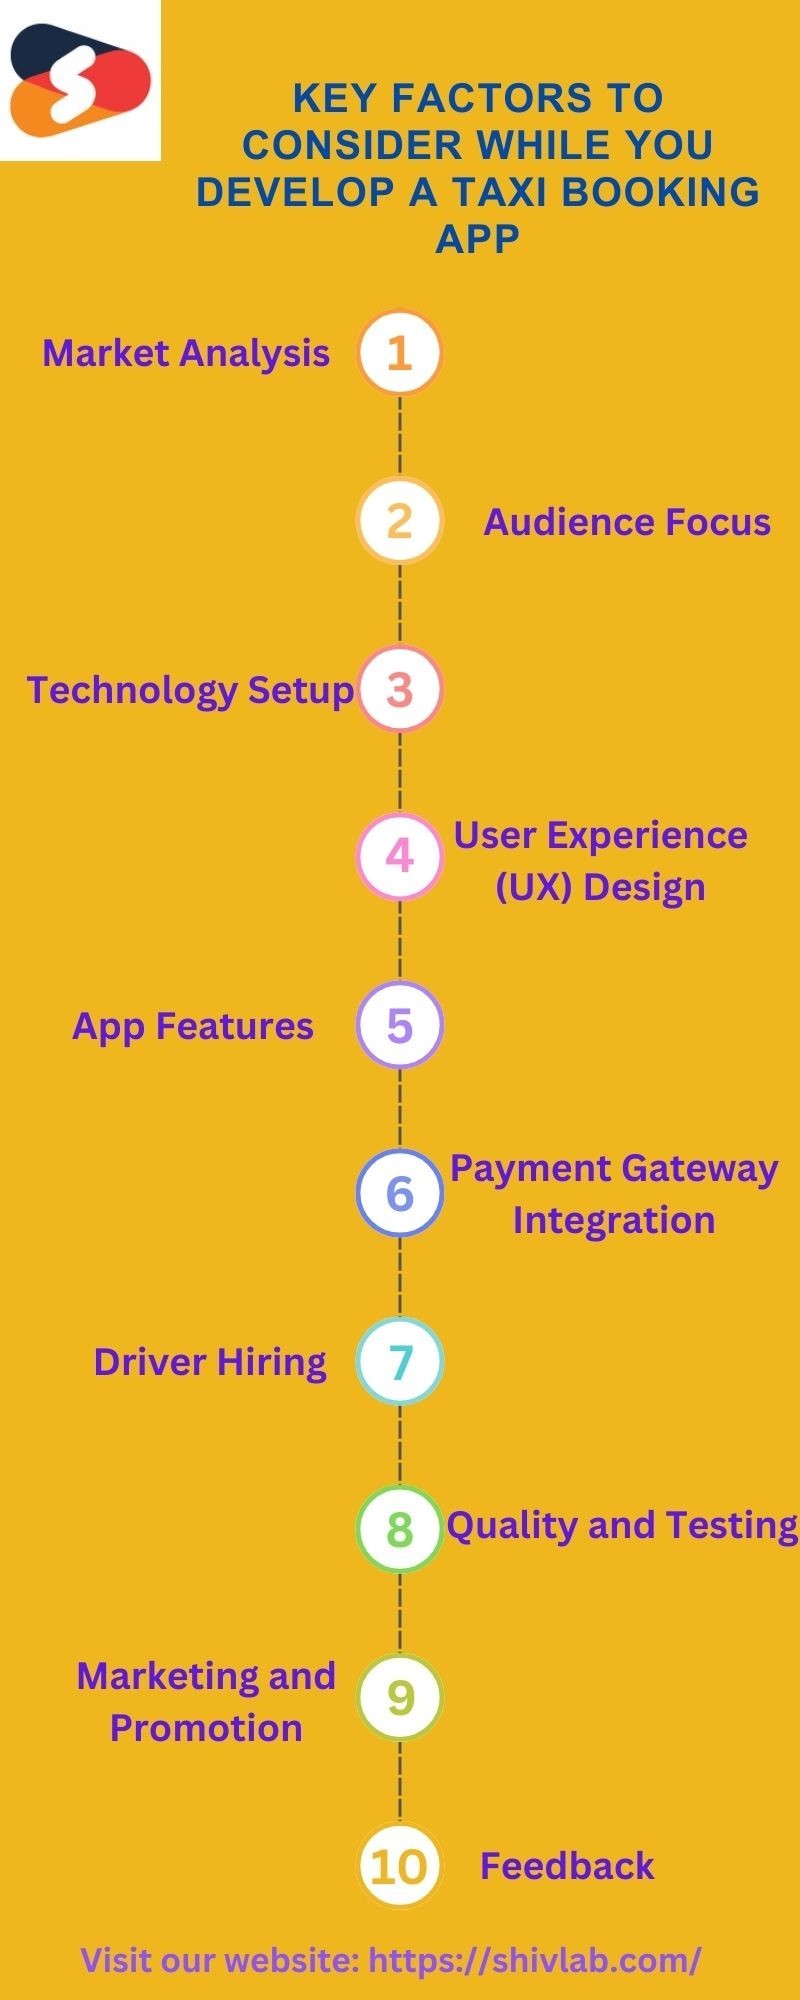 Key Factors to Consider while Developing a Taxi Booking App